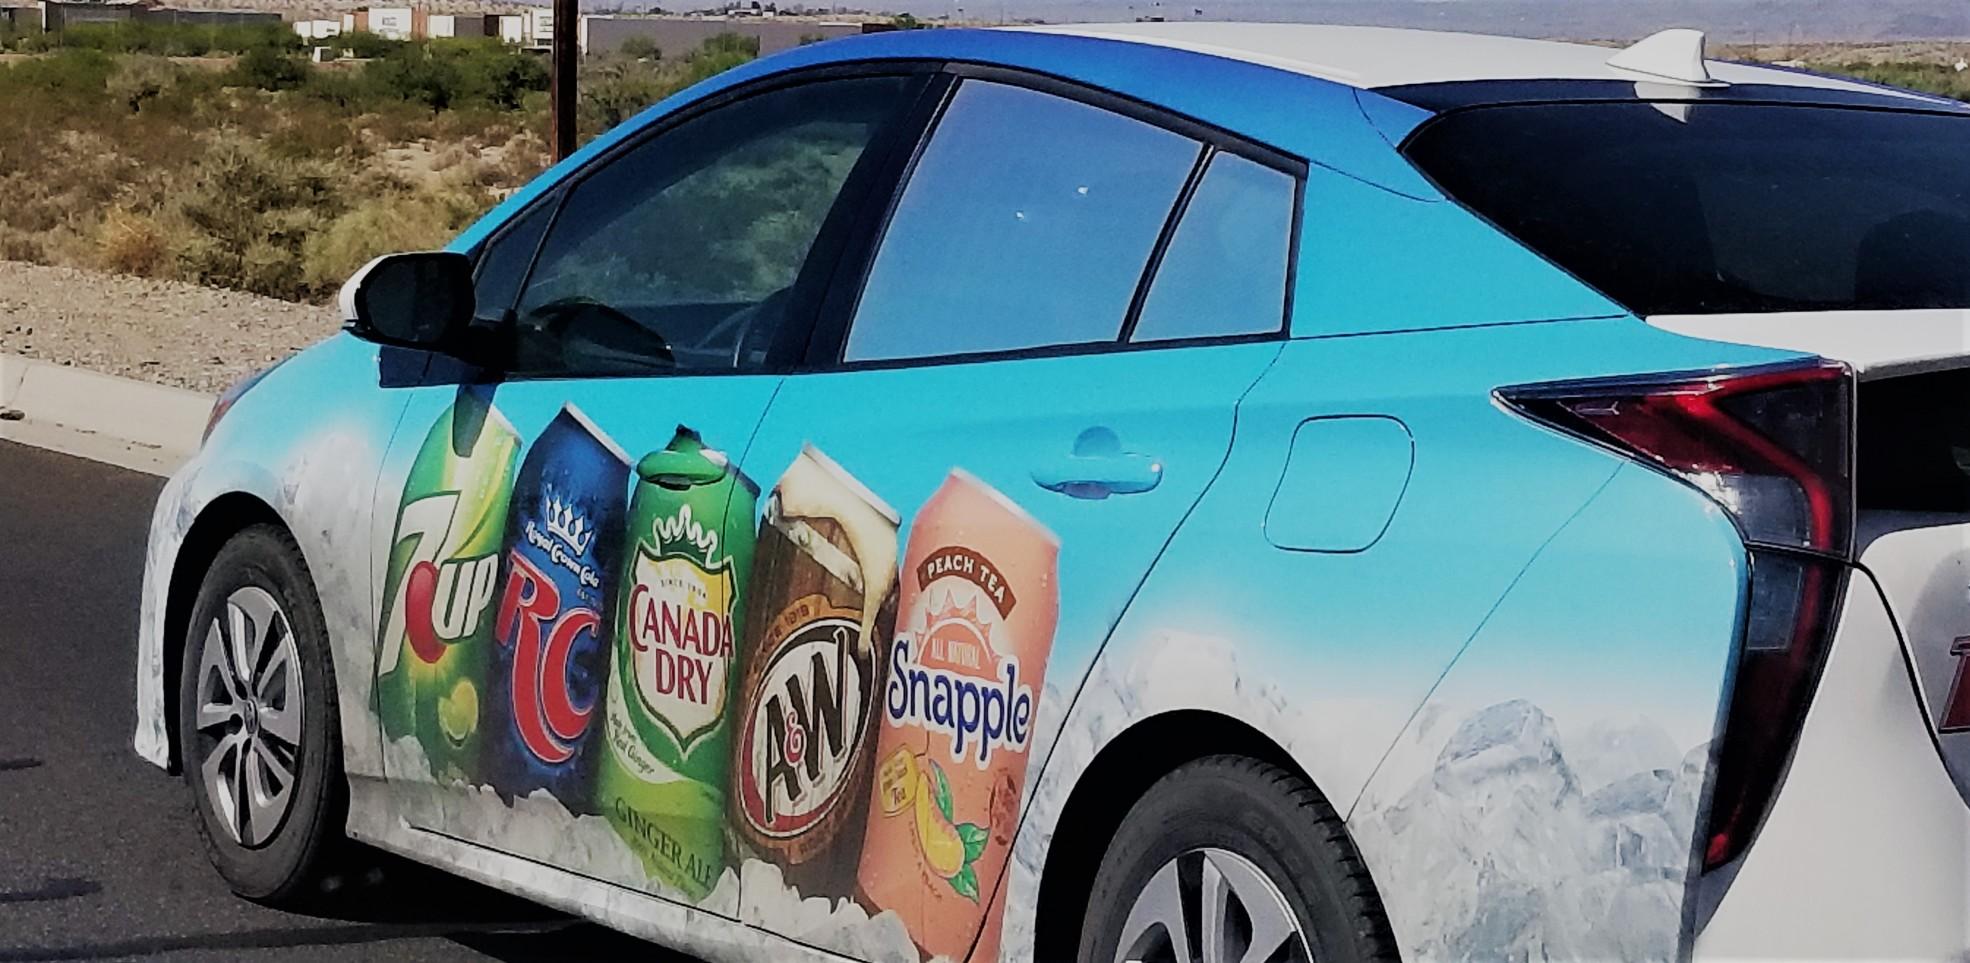 Would you let a company advertise on your car for cash?